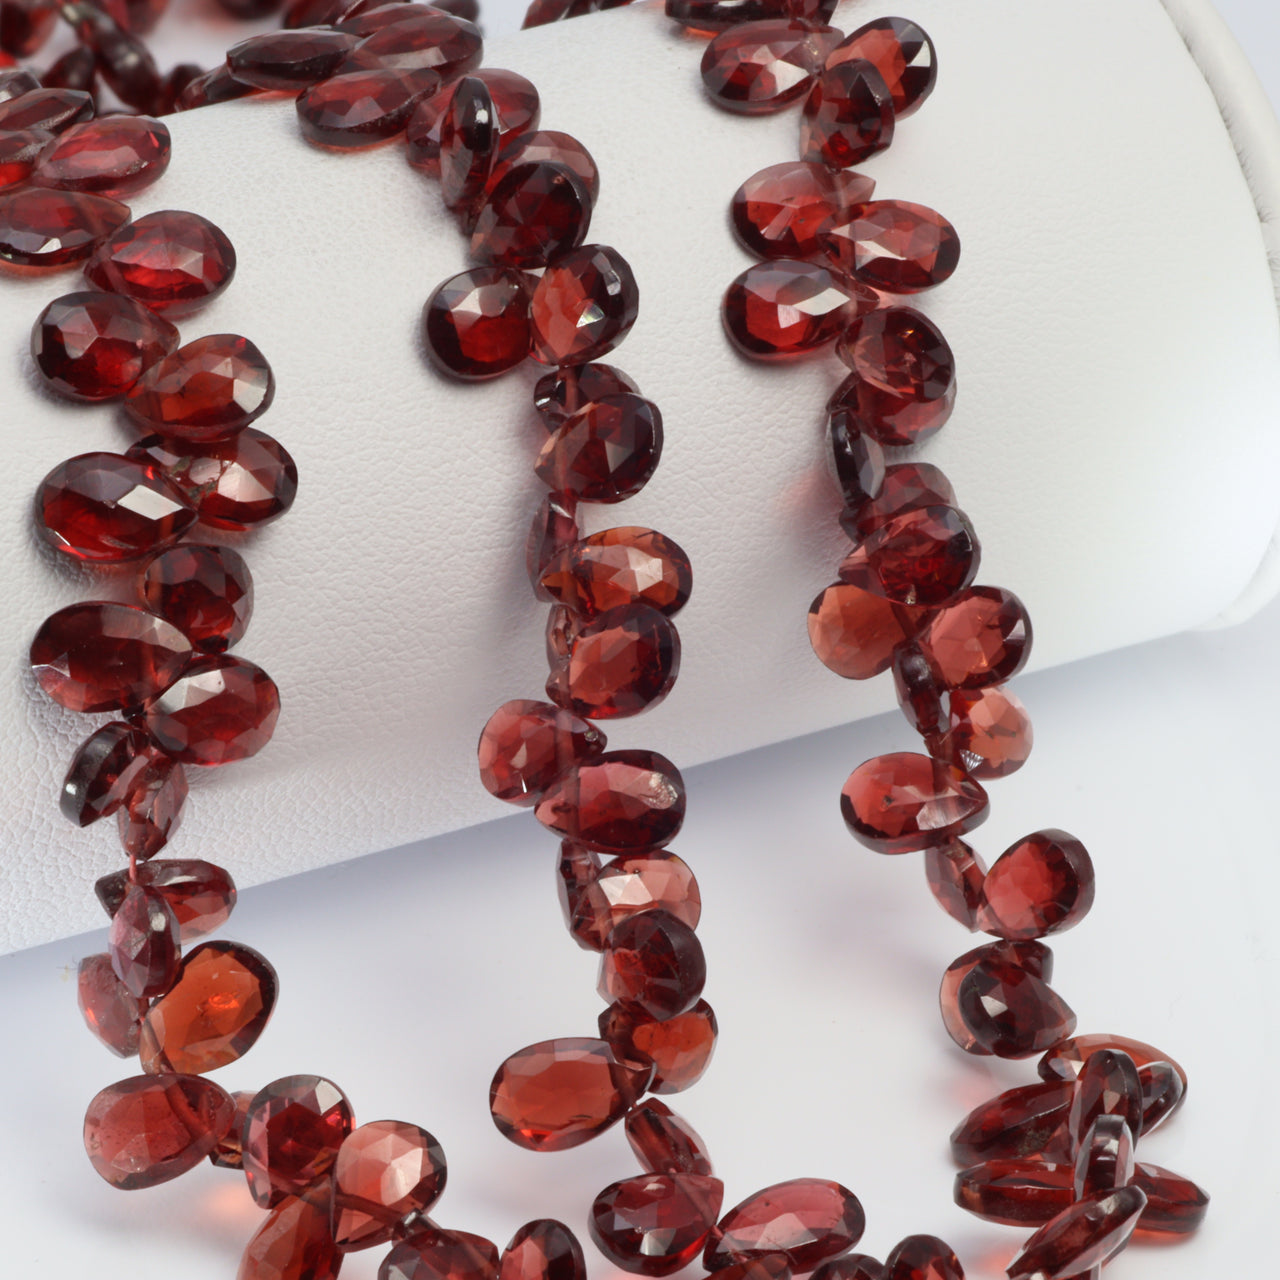 Red Garnet 7x5mm Faceted Pear Shaped Briolettes